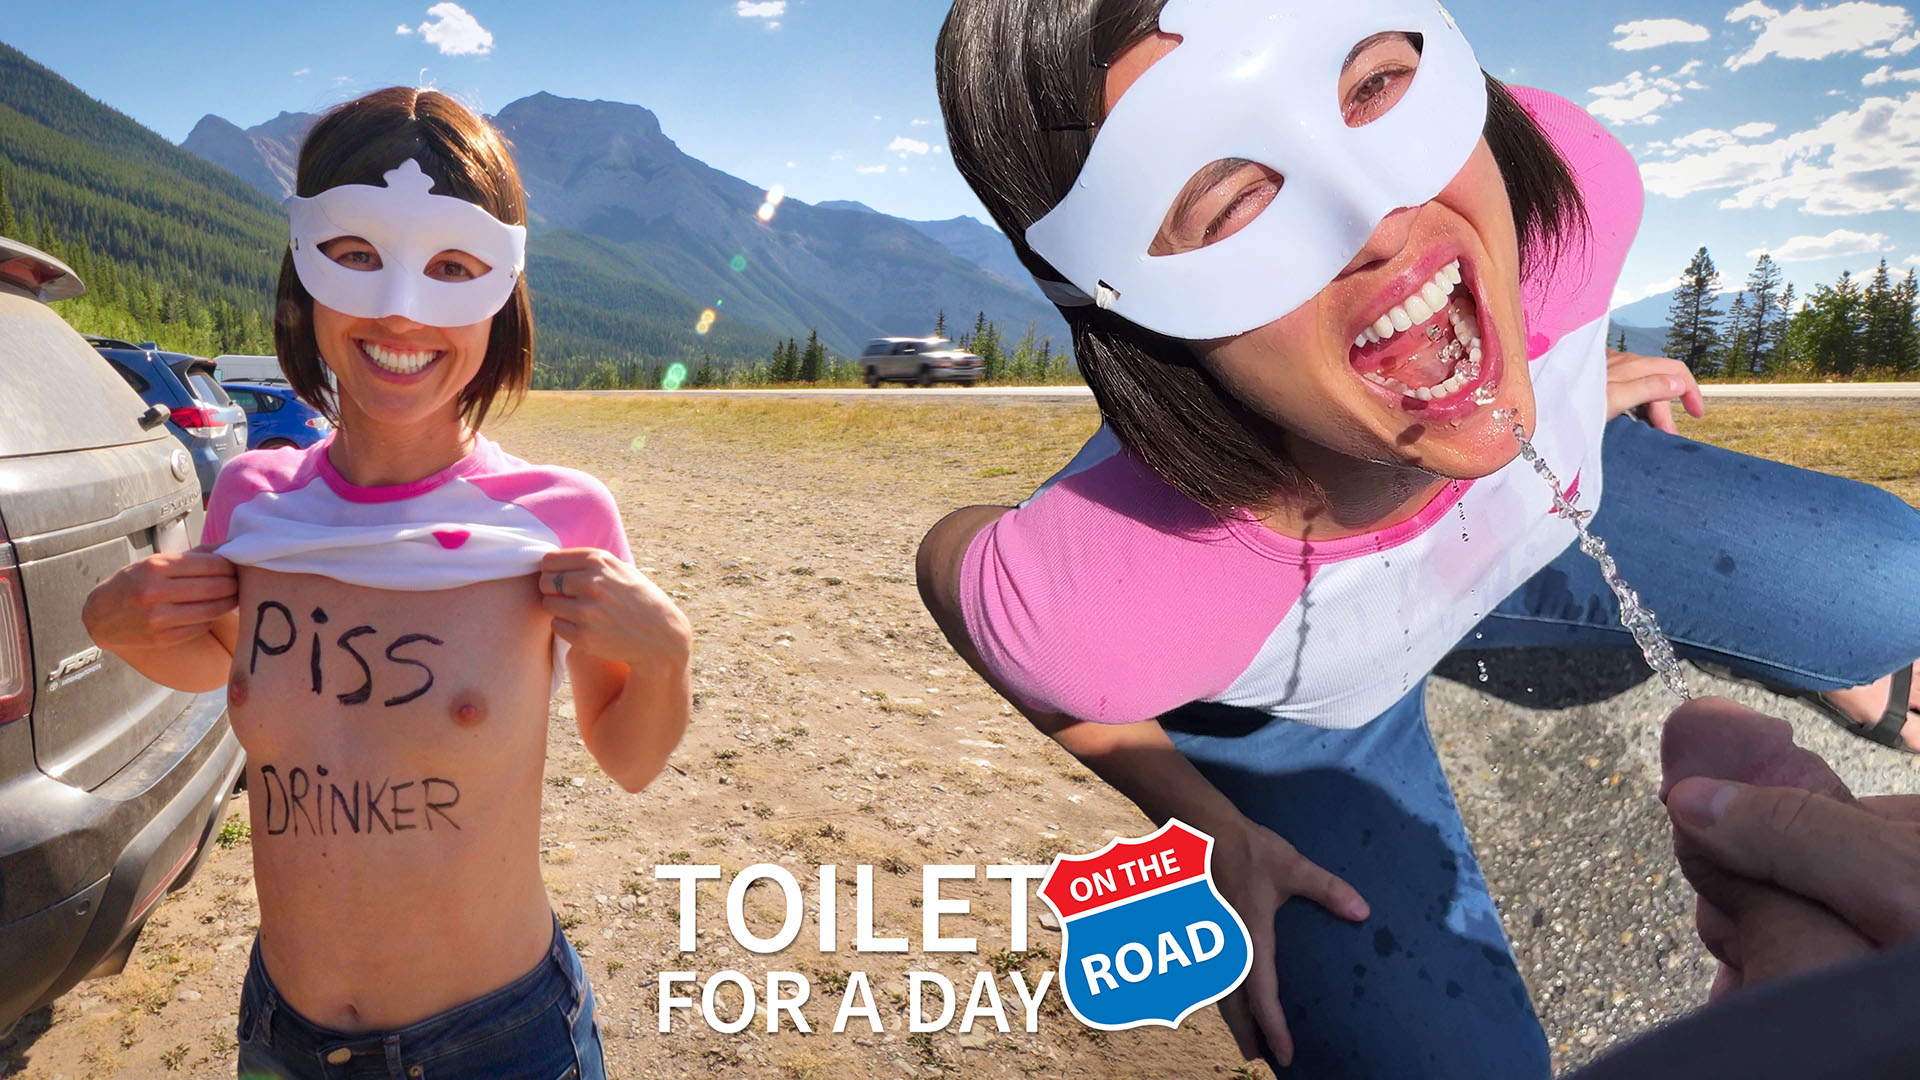 Thumbnail for Toilet for a Day – On the Road